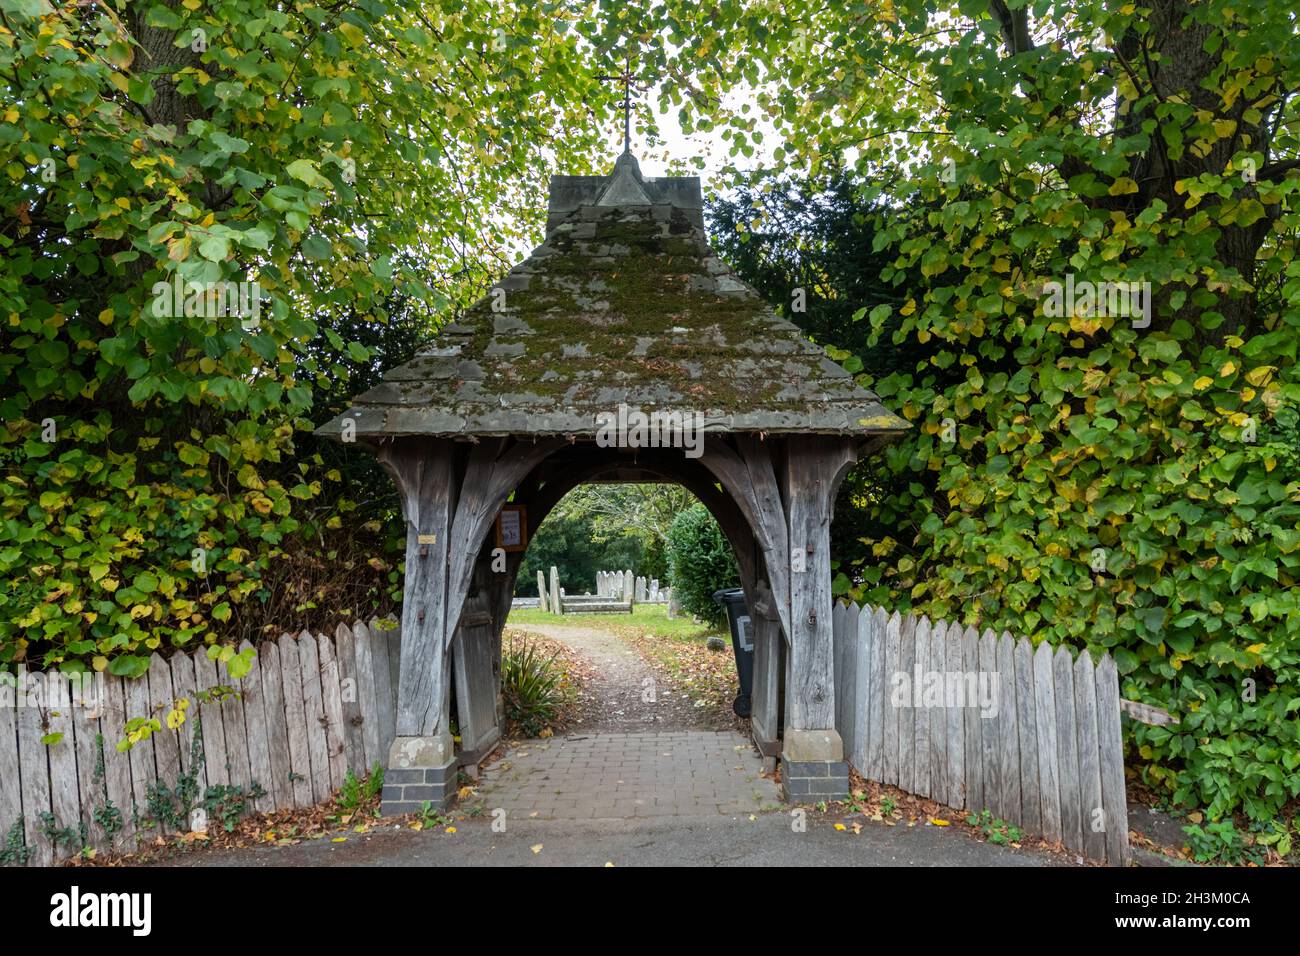 Lychgate (lych gate) entrance to St Andrew's Church in Sherborne St John, a village church in Hampshire, England, UK Stock Photo